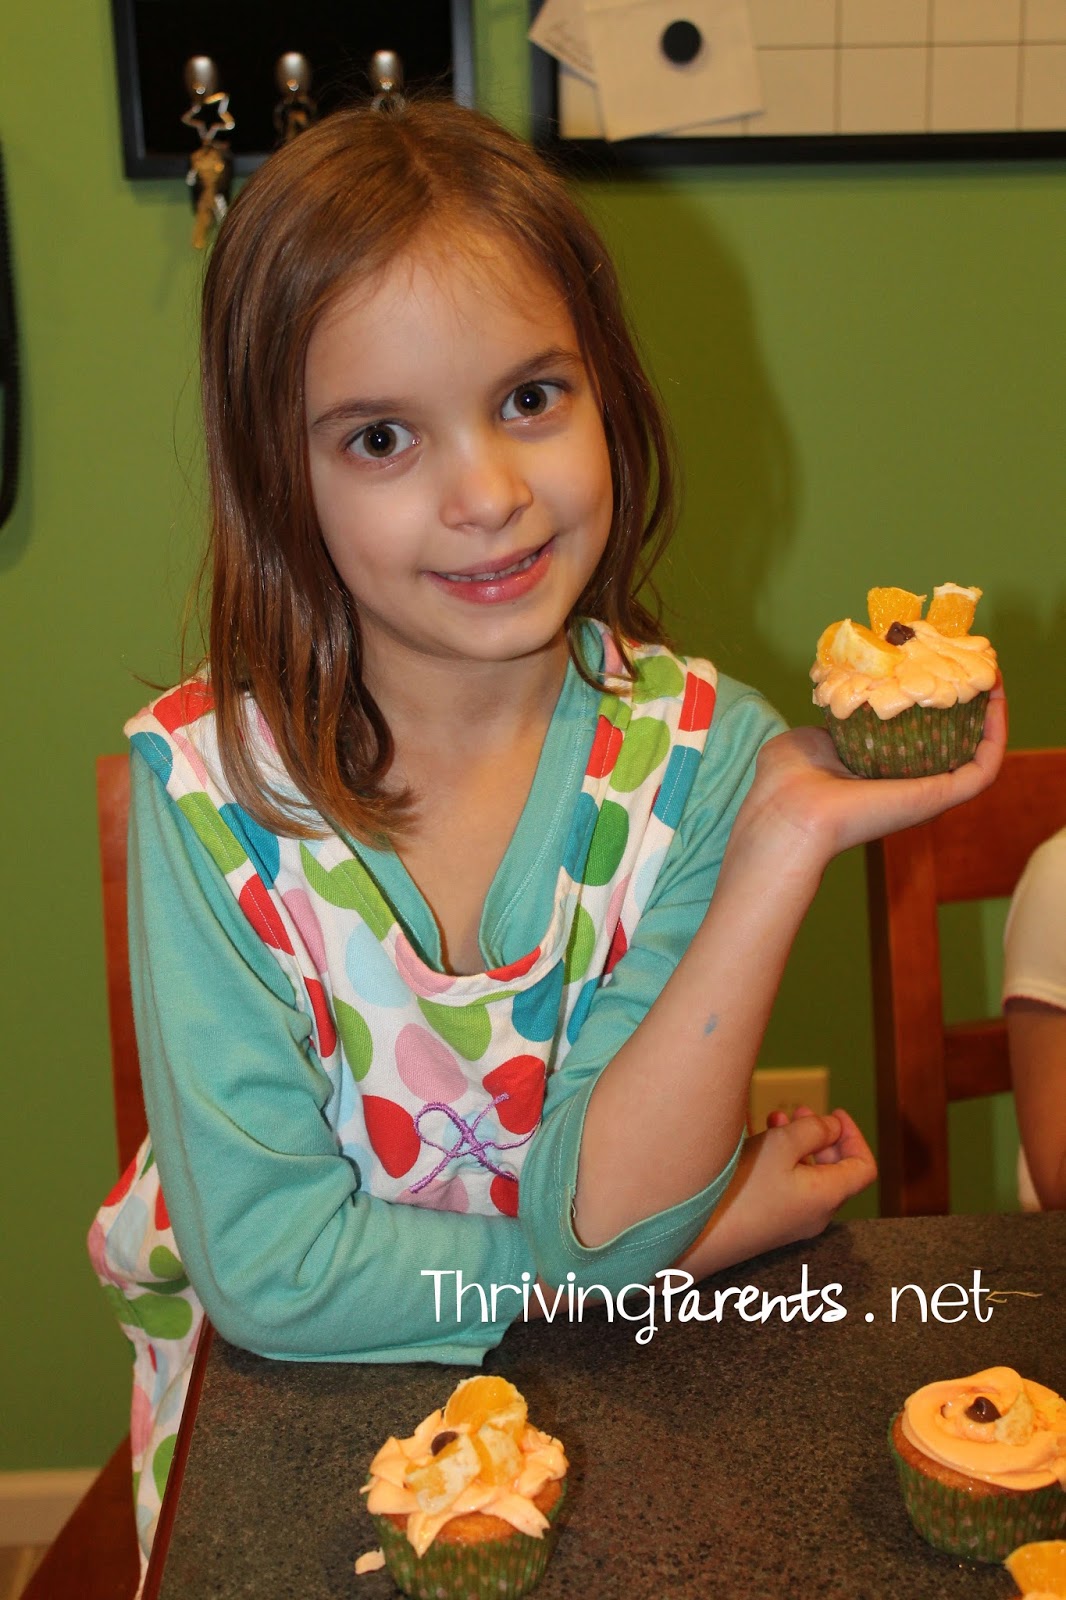 Family baking challenge - Thriving Parents